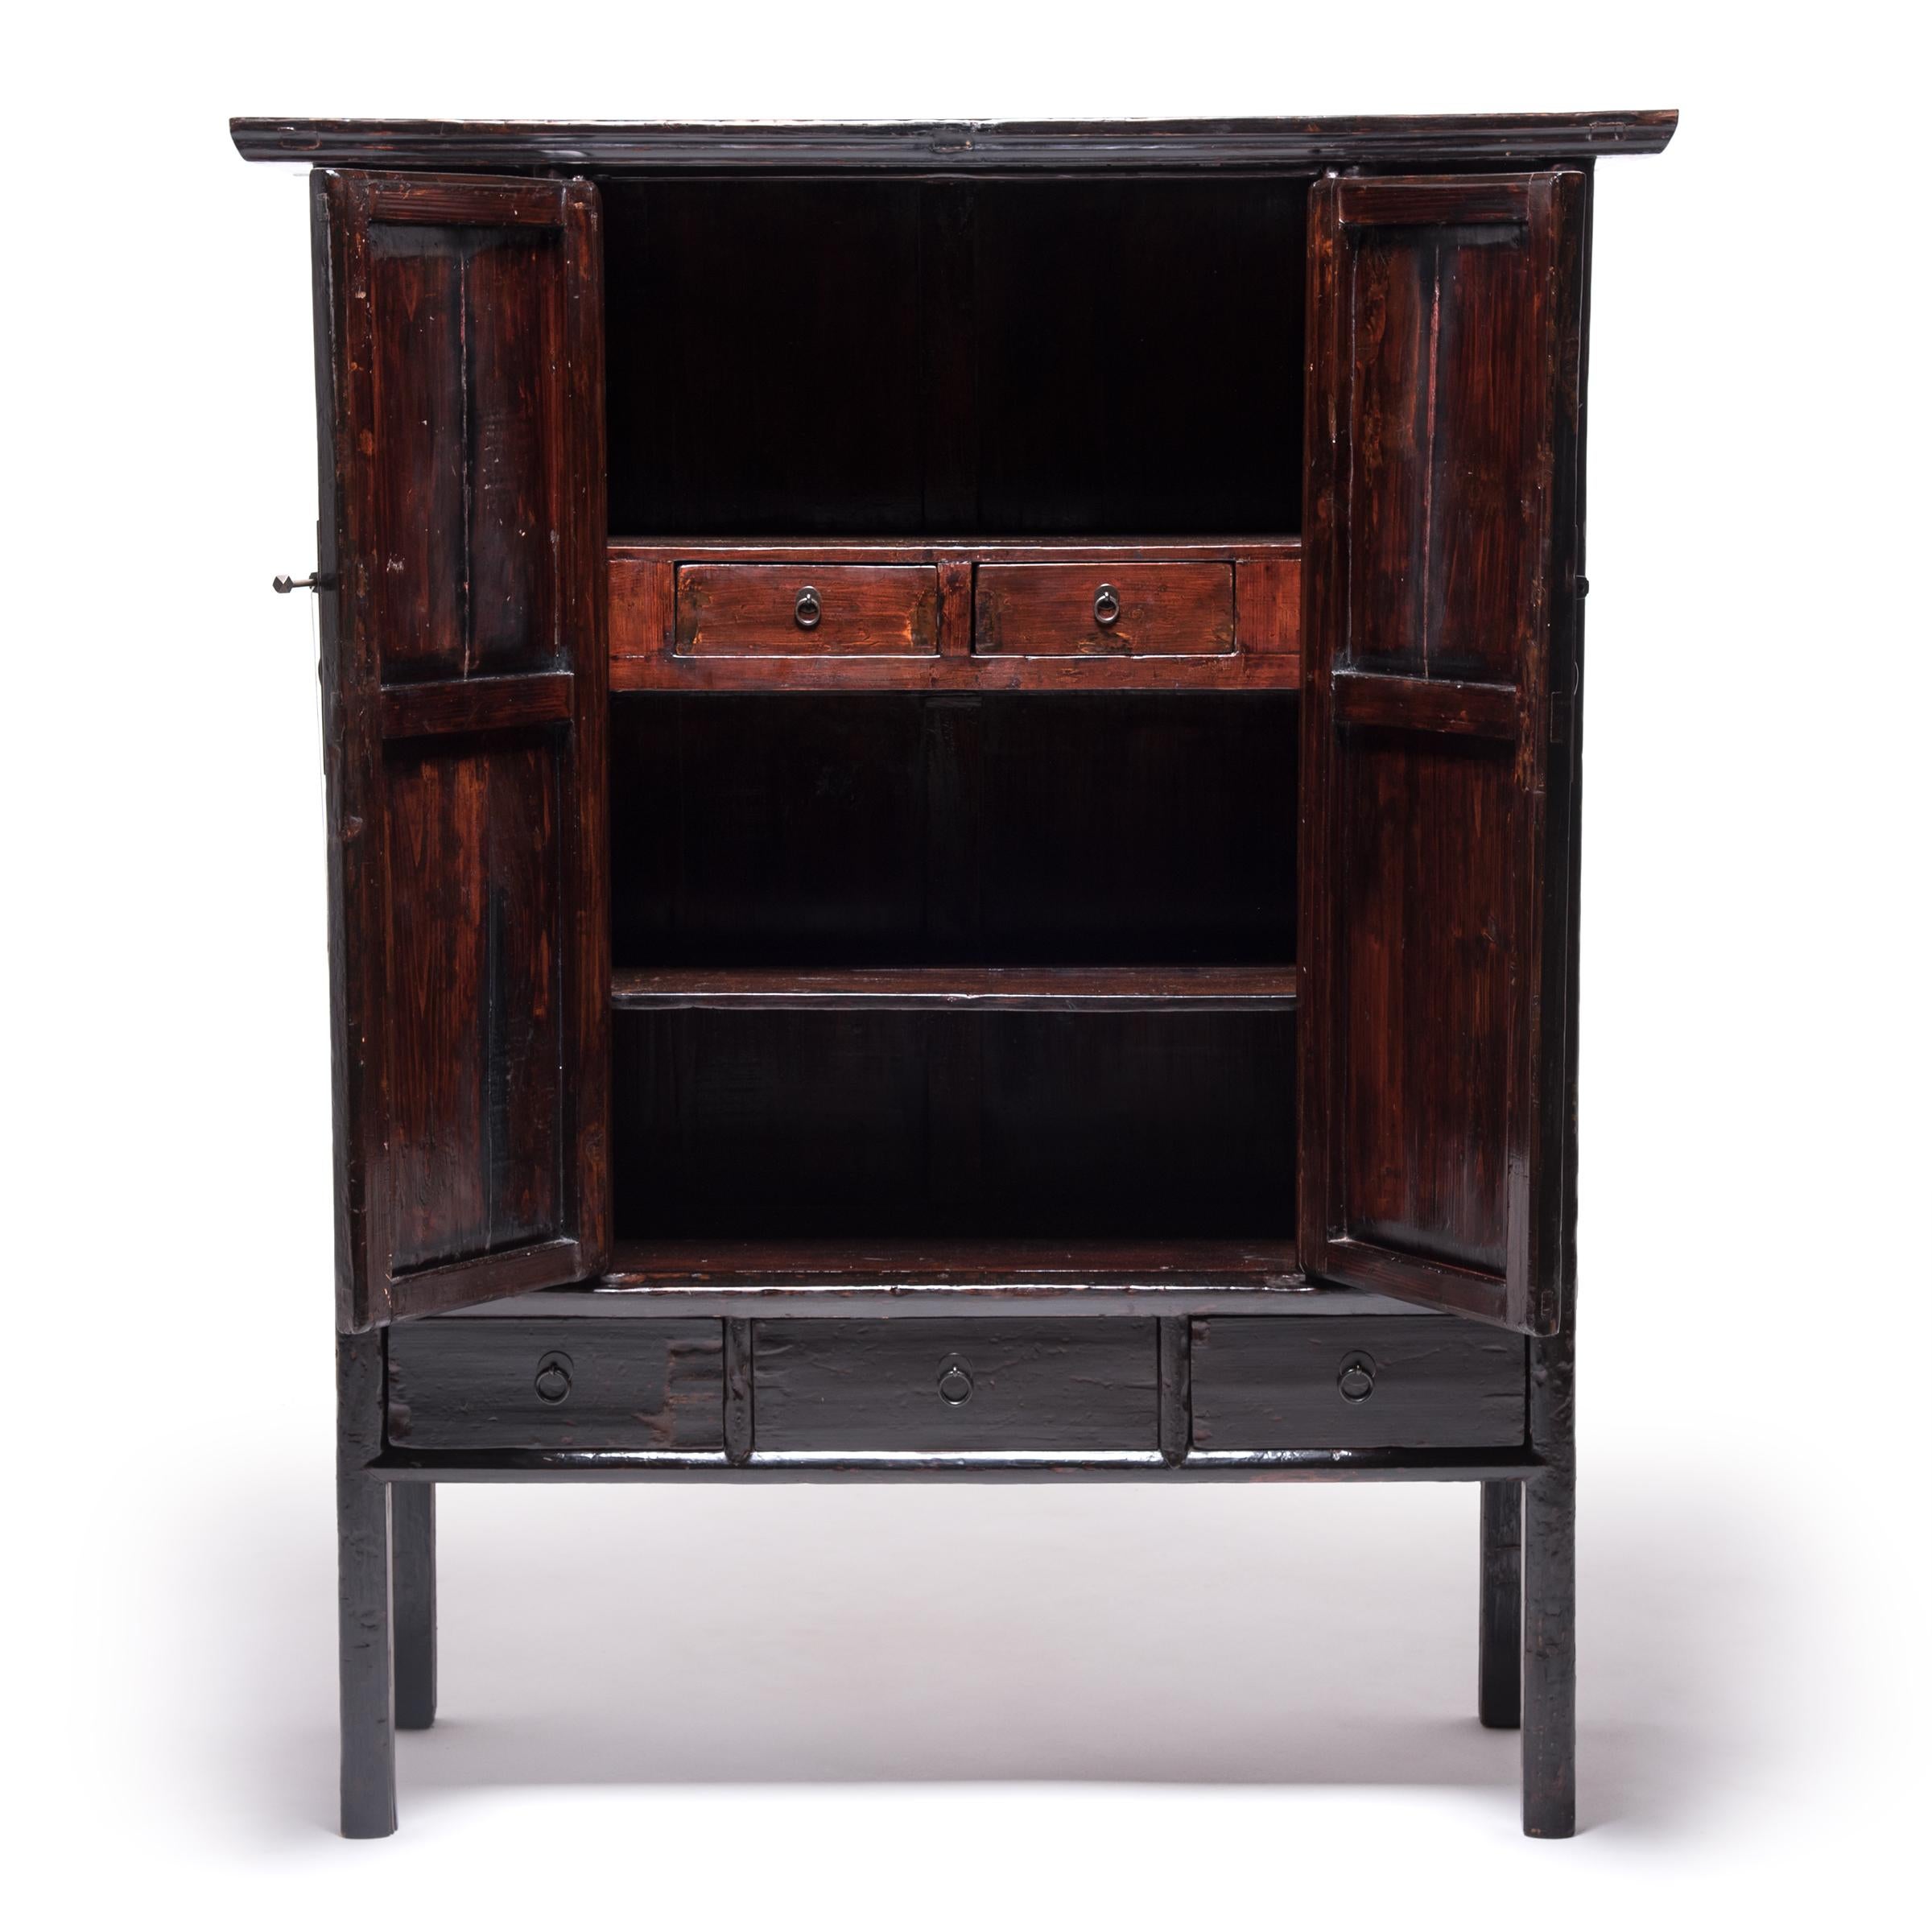 This painted cabinet beautifully represents 19th century Furniture from China's Fujian province. The simple, elegant form hearkens back to classical Chinese furniture designs, but the abstract painting and carvings were shaped by the artist’s